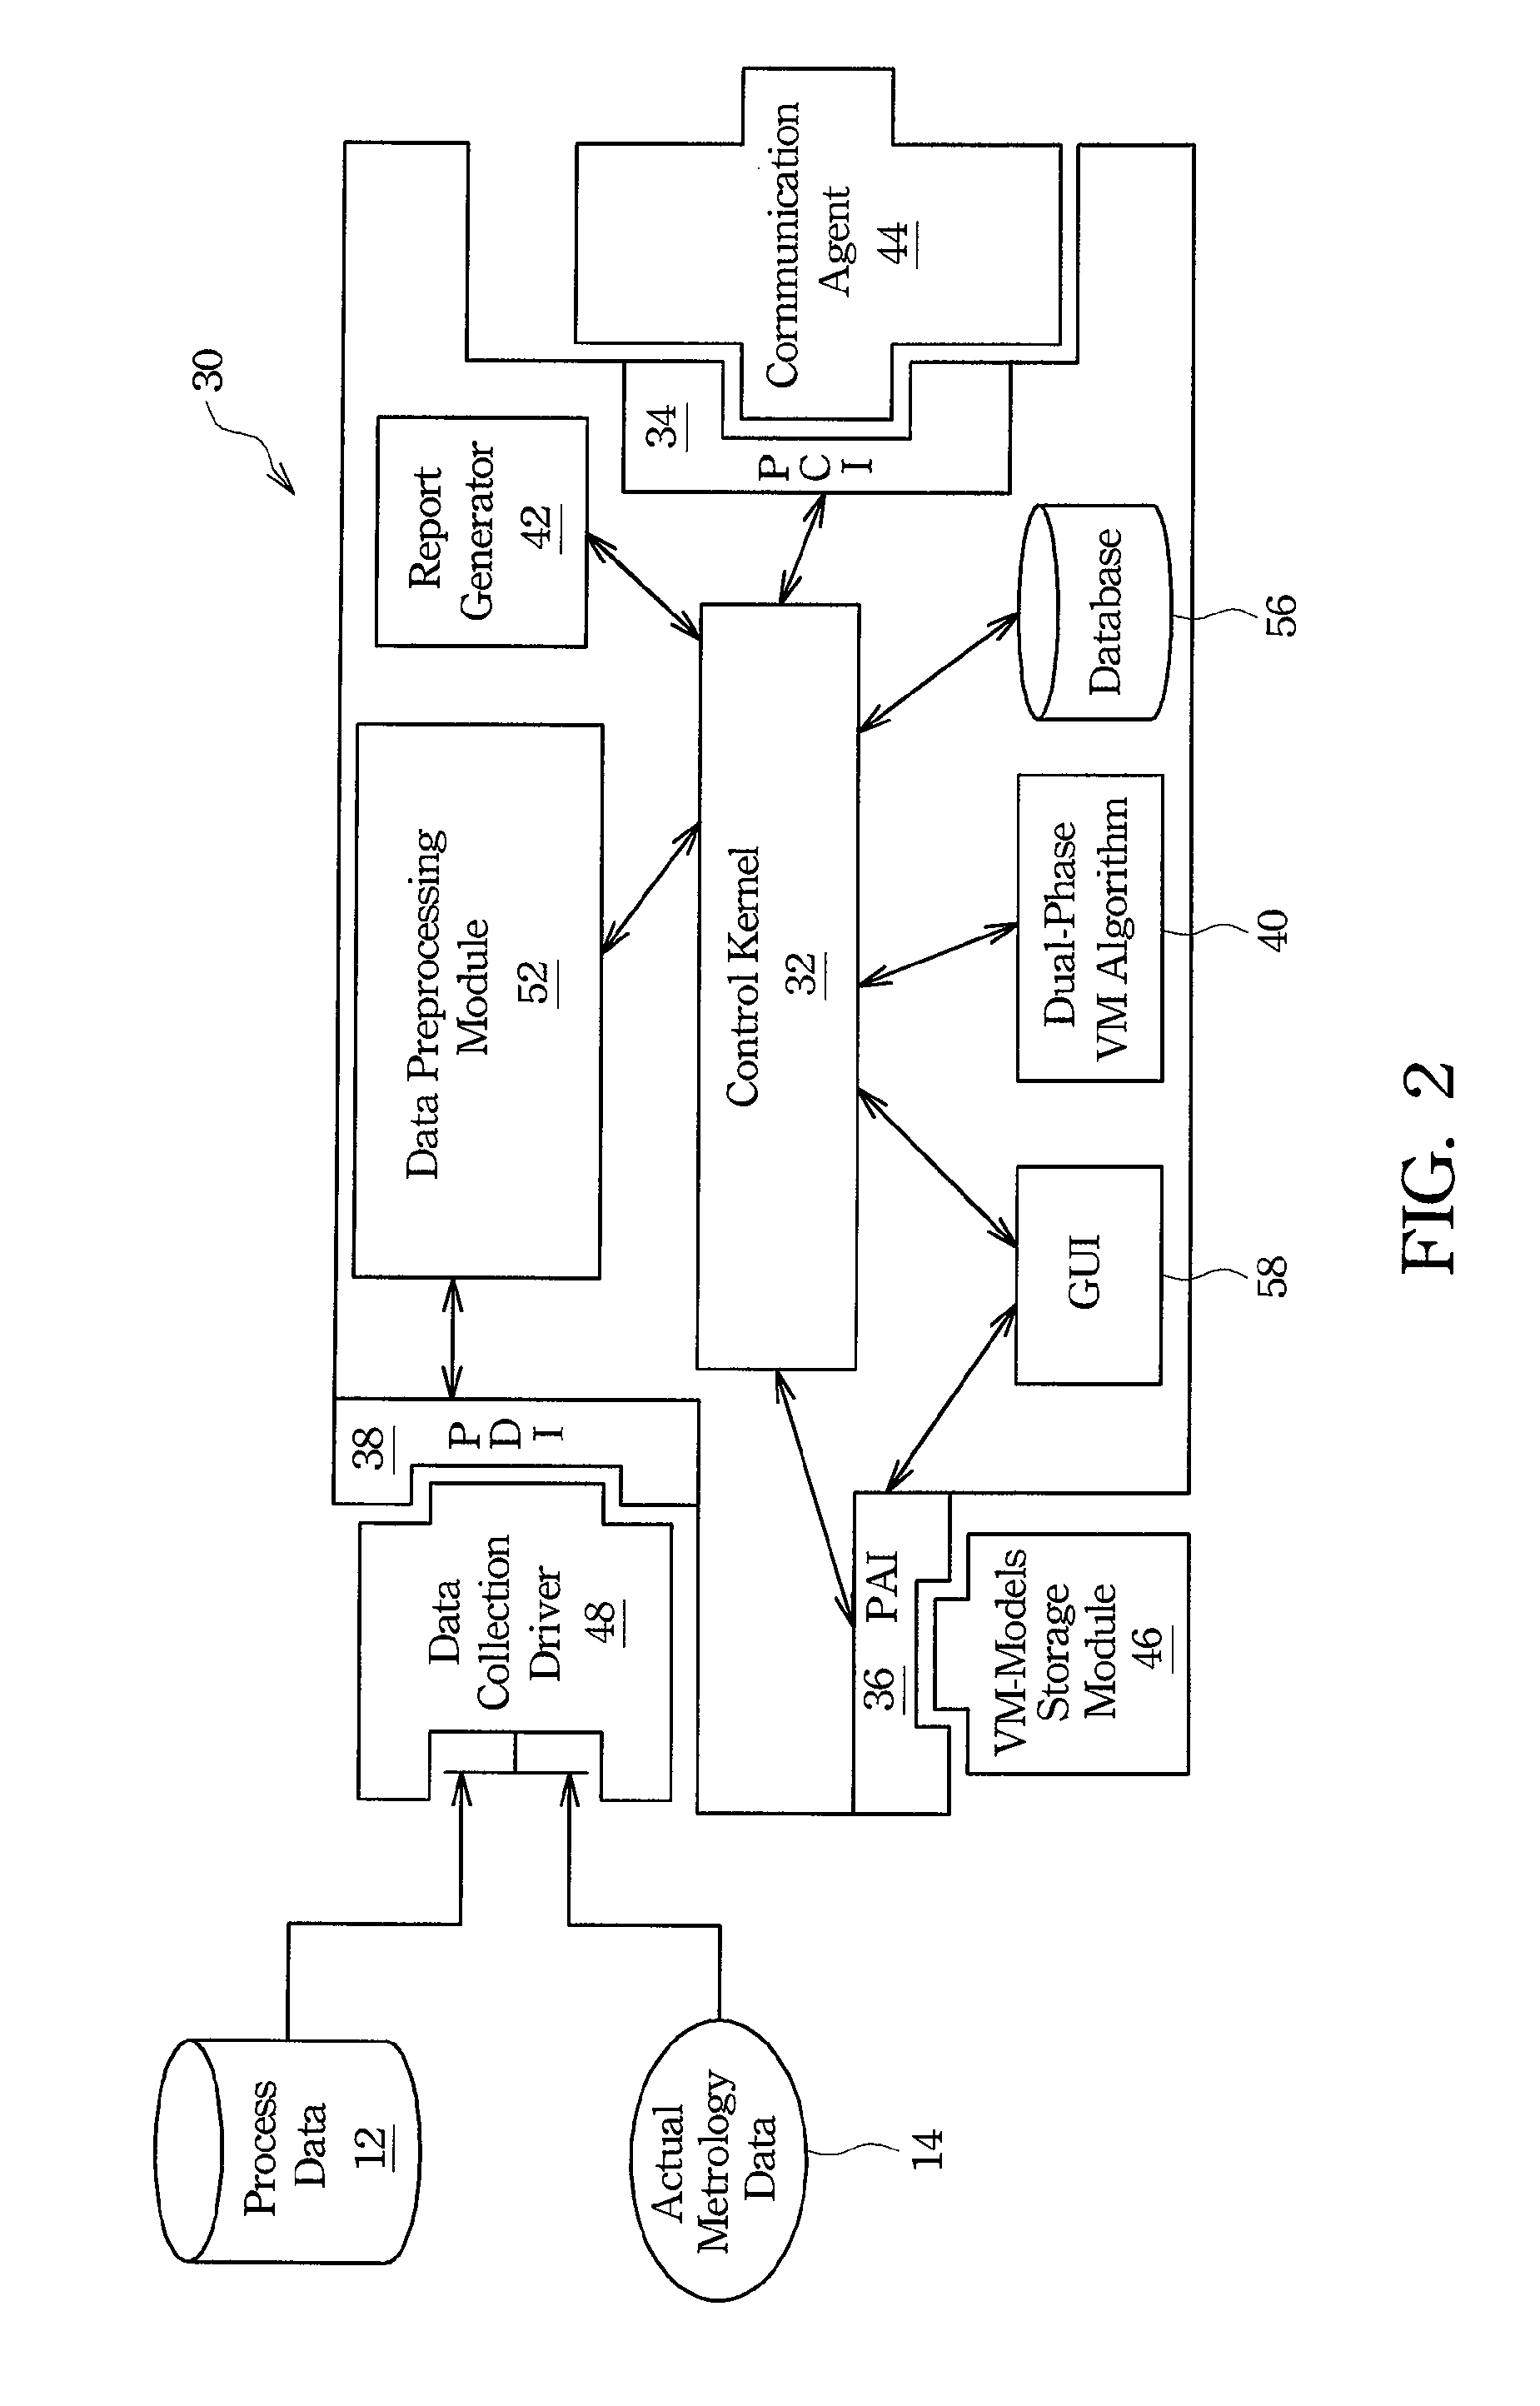 System and method for automatic virtual metrology